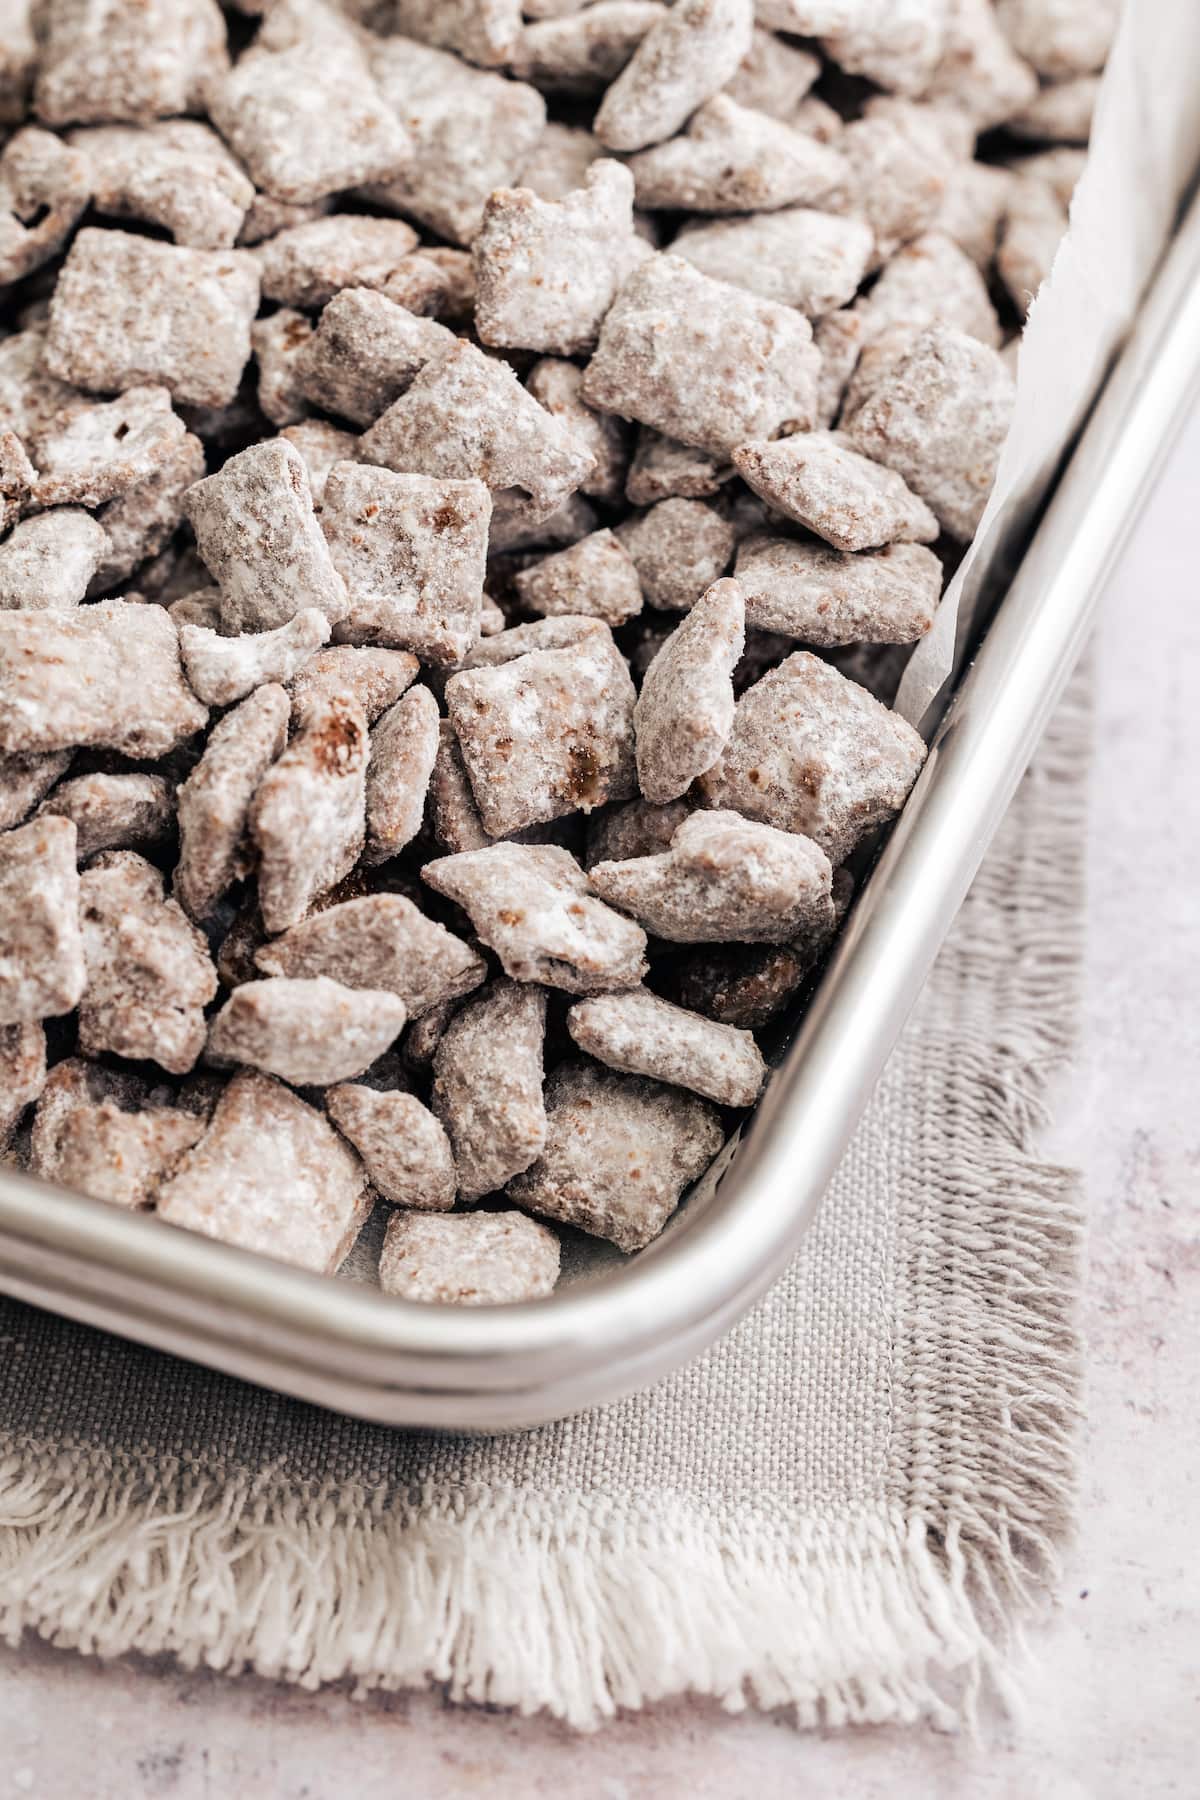 The corner of a metal pan filled with homemade puppy chow.